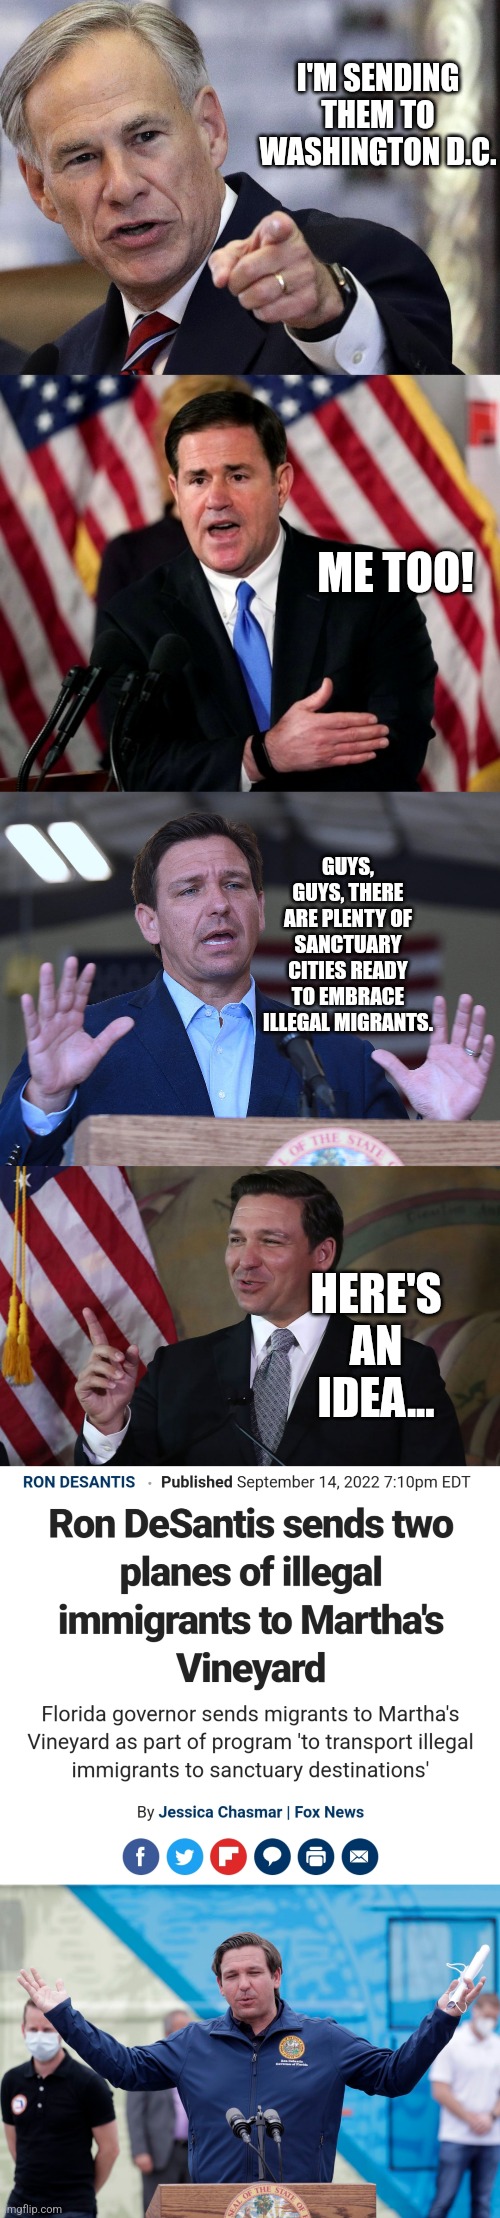 I'M SENDING THEM TO WASHINGTON D.C. ME TOO! GUYS, GUYS, THERE ARE PLENTY OF SANCTUARY CITIES READY TO EMBRACE ILLEGAL MIGRANTS. HERE'S AN IDEA... | image tagged in modern problems require modern solutions,politics lol | made w/ Imgflip meme maker